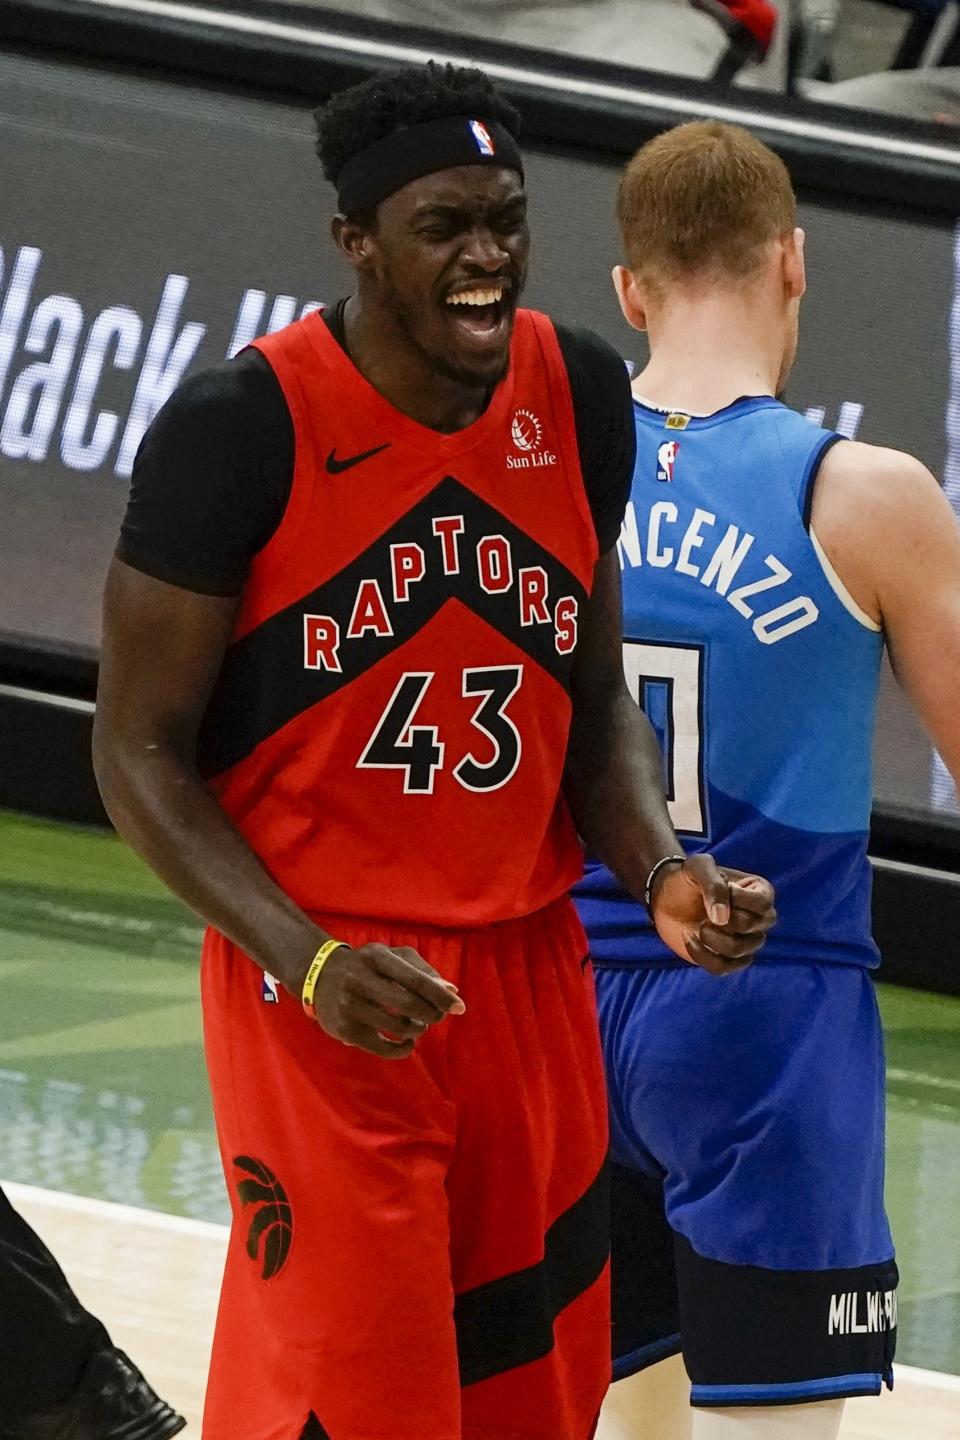 Toronto Raptors' Pascal Siakam reacts after making a basket and being fouled during the first half of an NBA basketball game against the Milwaukee Bucks Thursday, Feb. 18, 2021, in Milwaukee. (AP Photo/Morry Gash)